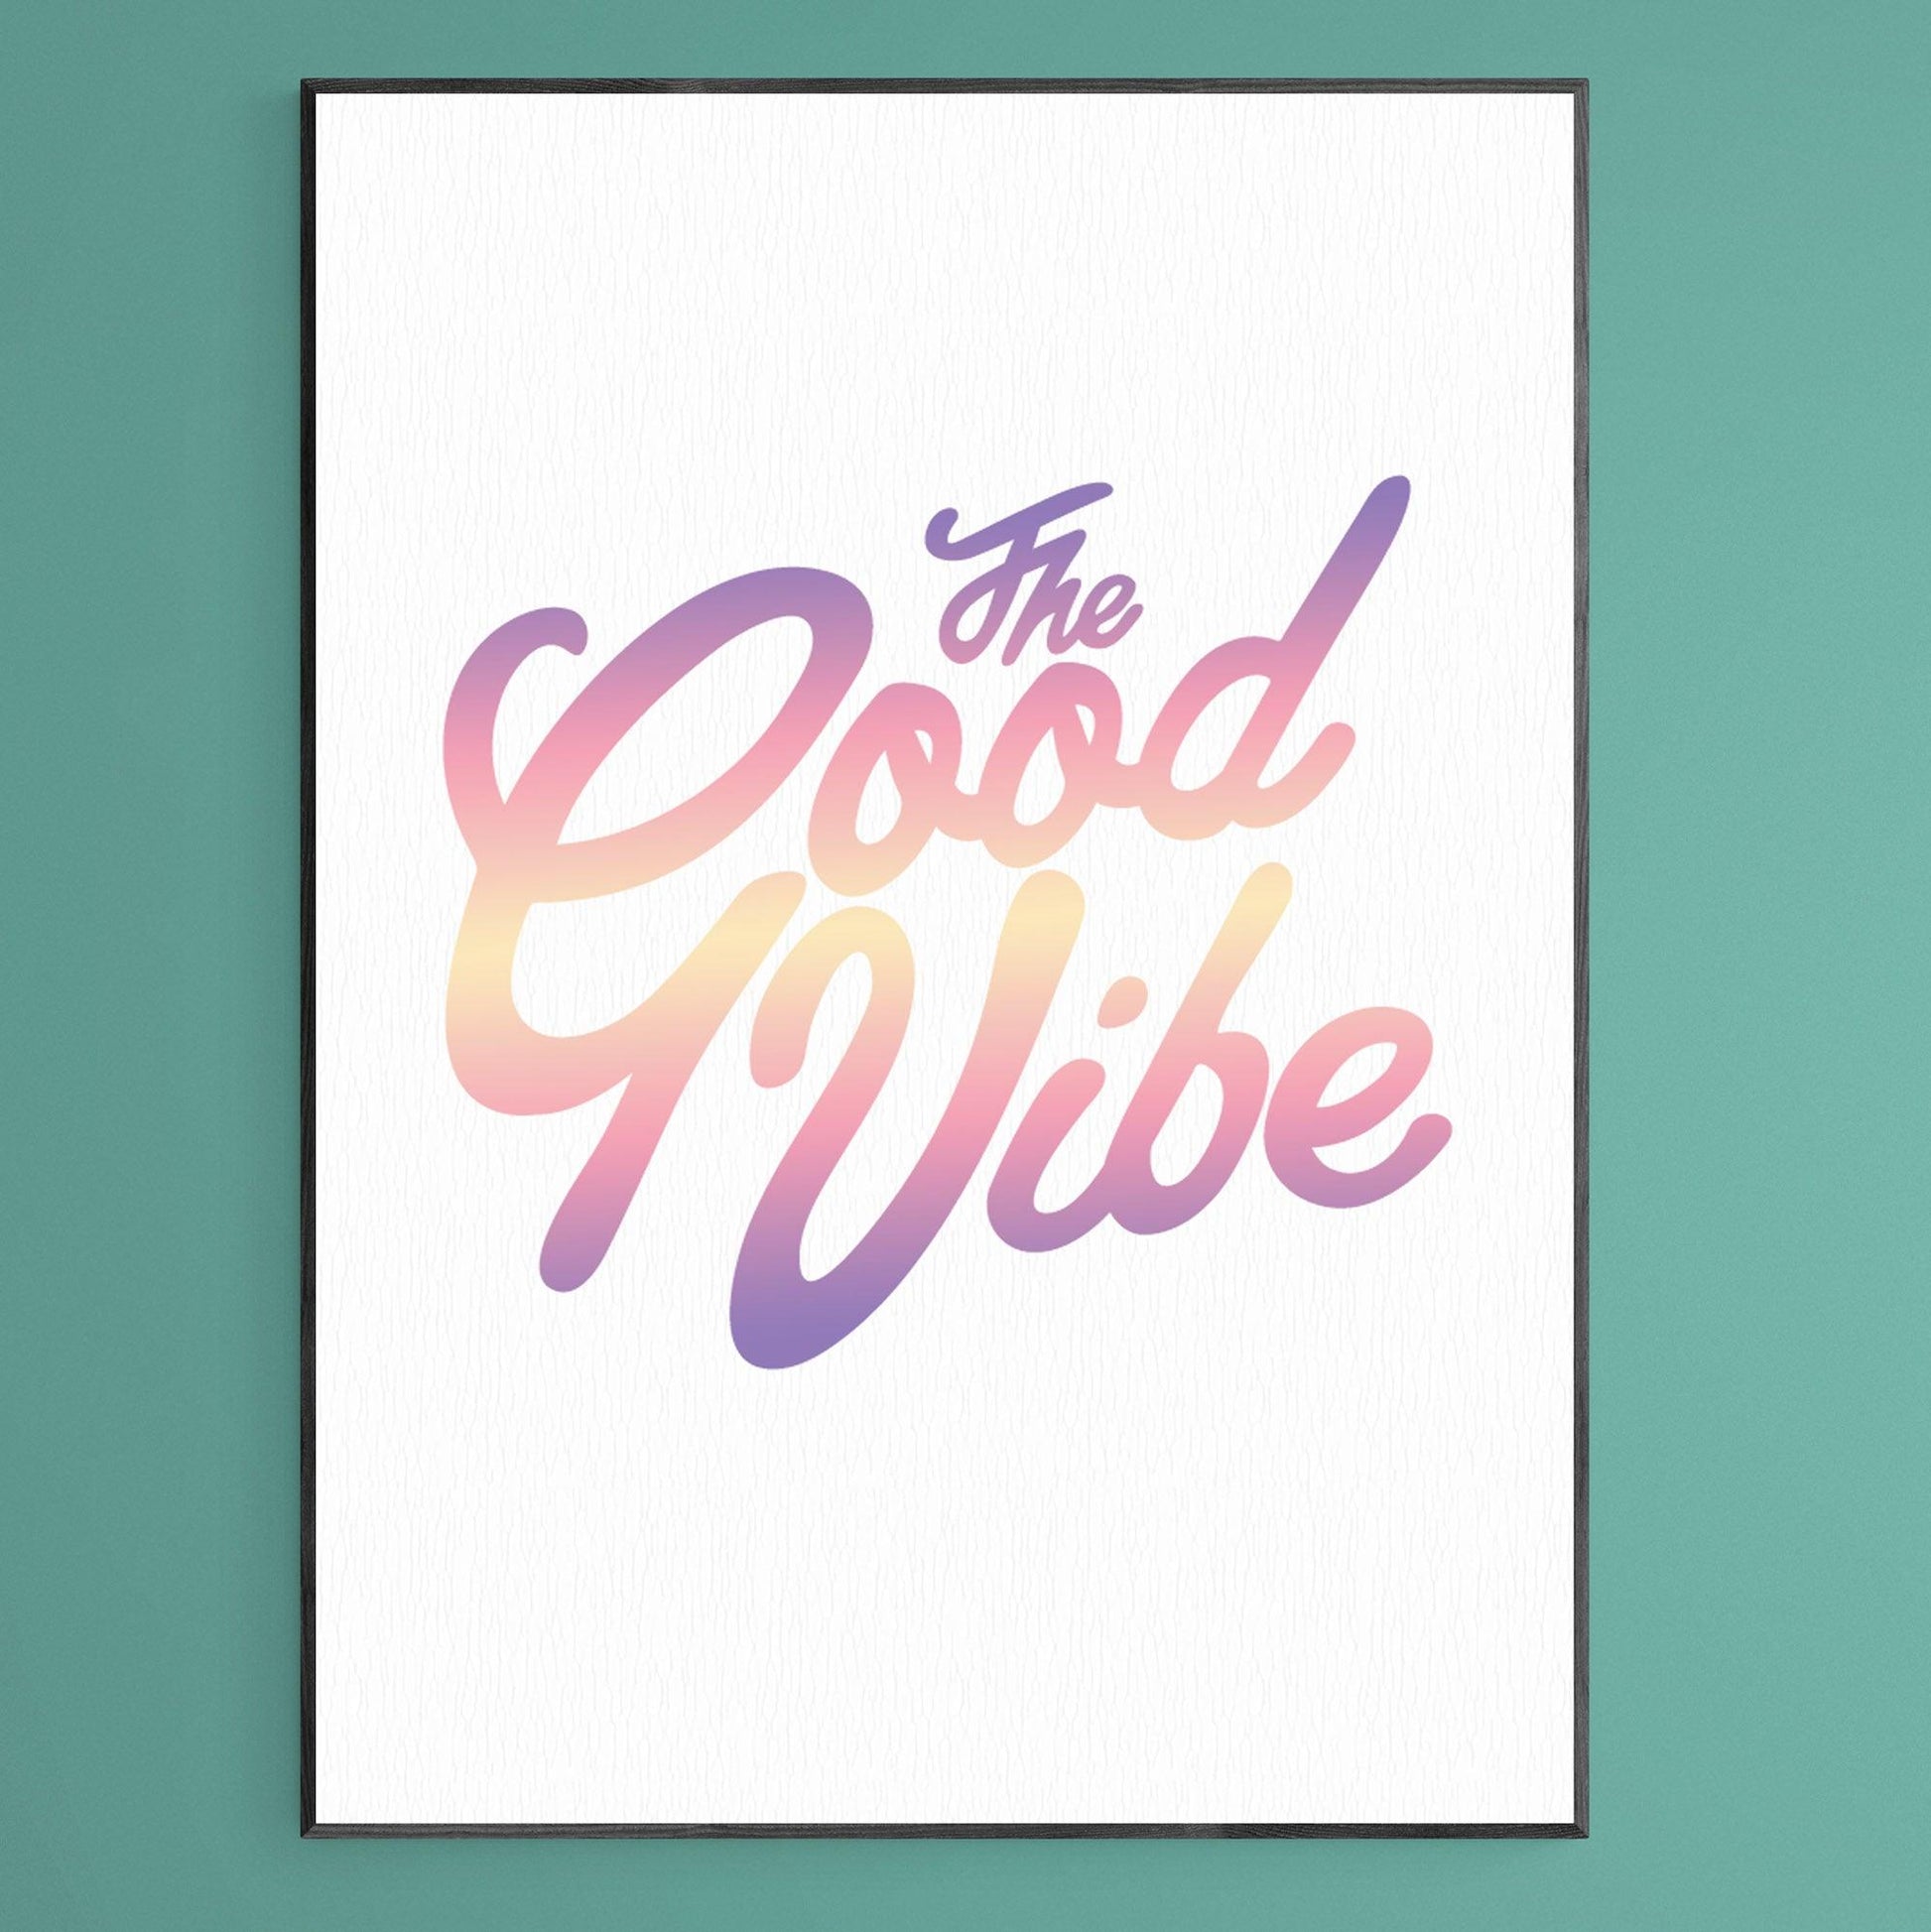 Bring positive vibes, not drama, into your home with this unique ‘Good Vibes Only’ print. Featuring a range of stylish posters and wall art prints, this range of home decor ideas offers a colourful, creative way to spruce up your living space. Choose from vintage posters, cheap posters, and more! Spread the good vibes. - 98types